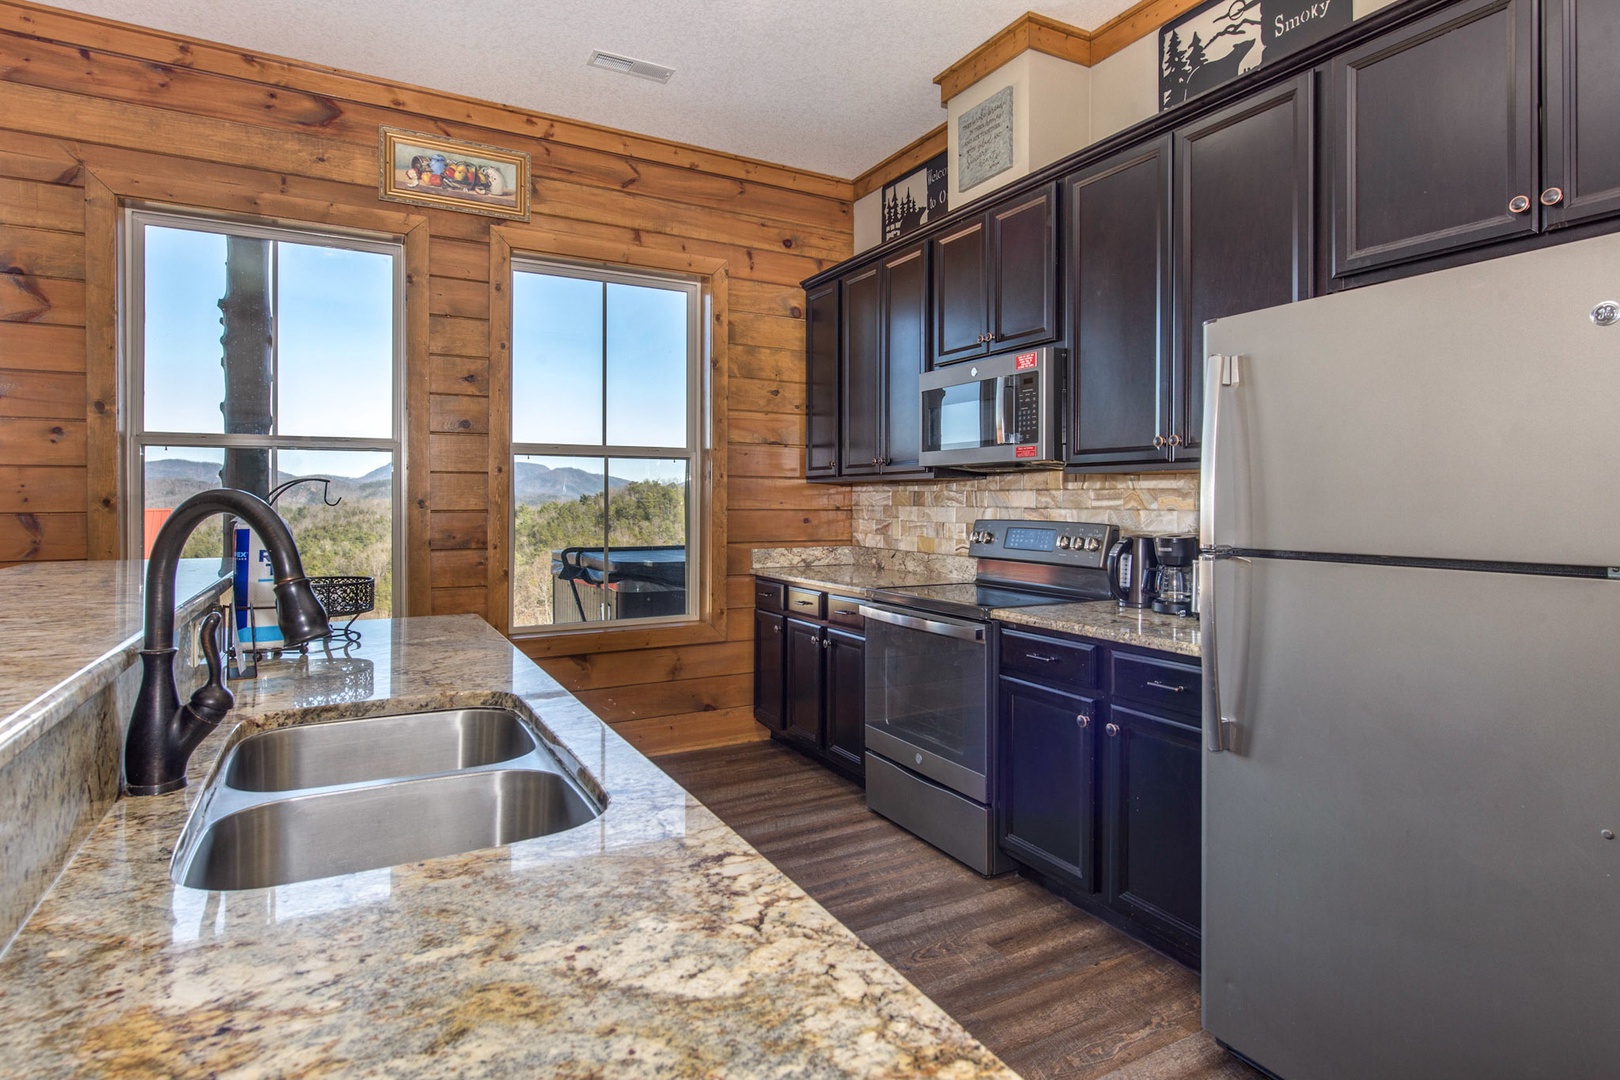 The spacious kitchen provides ample room and all the comforts of home.